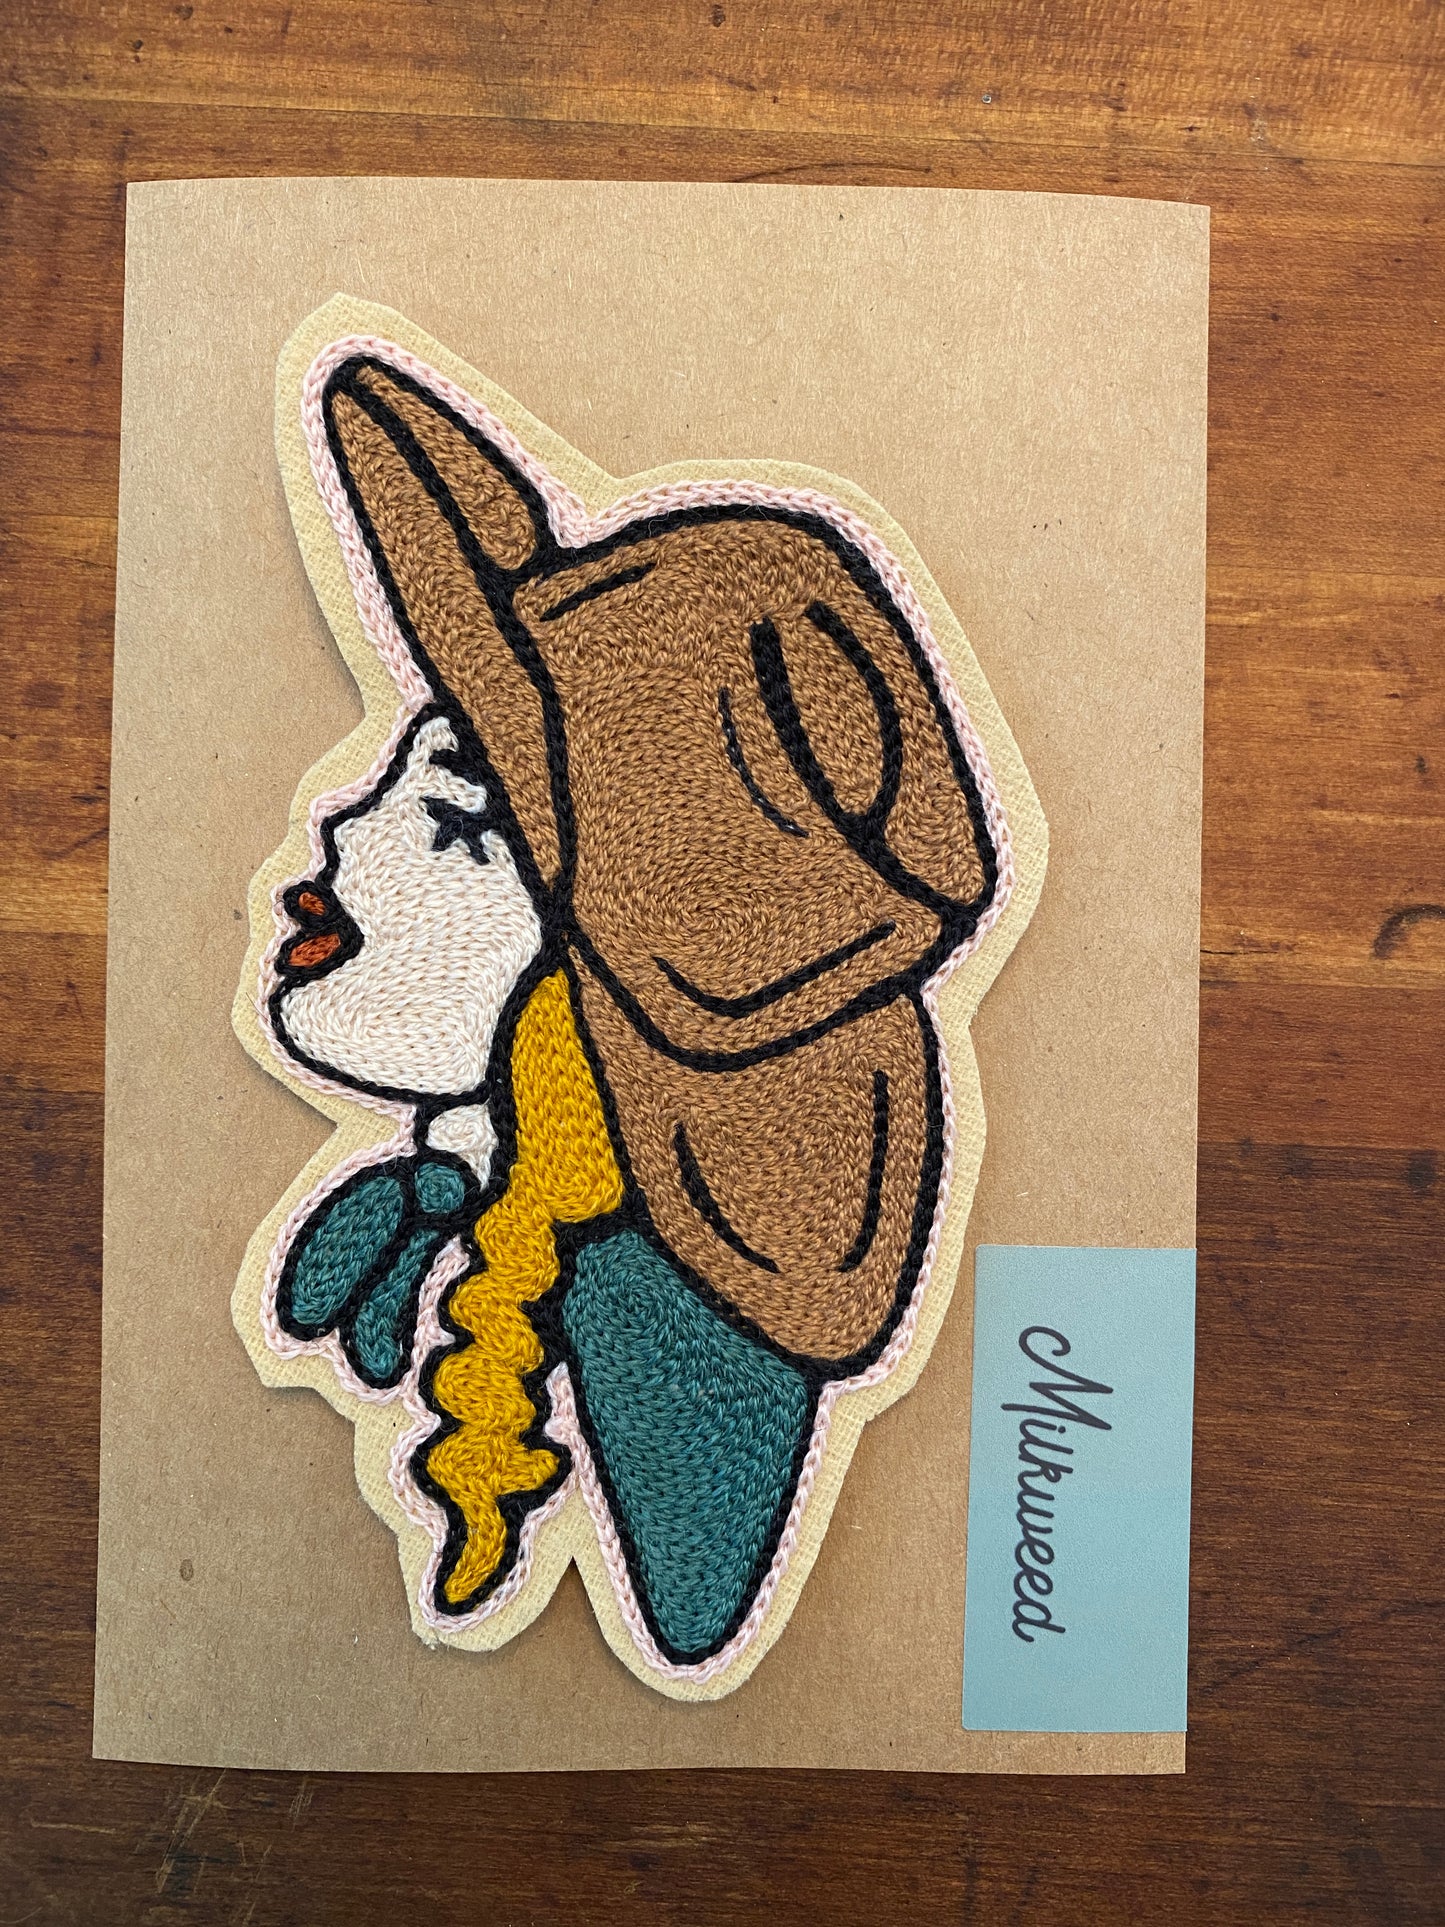 Cowgirl Patch